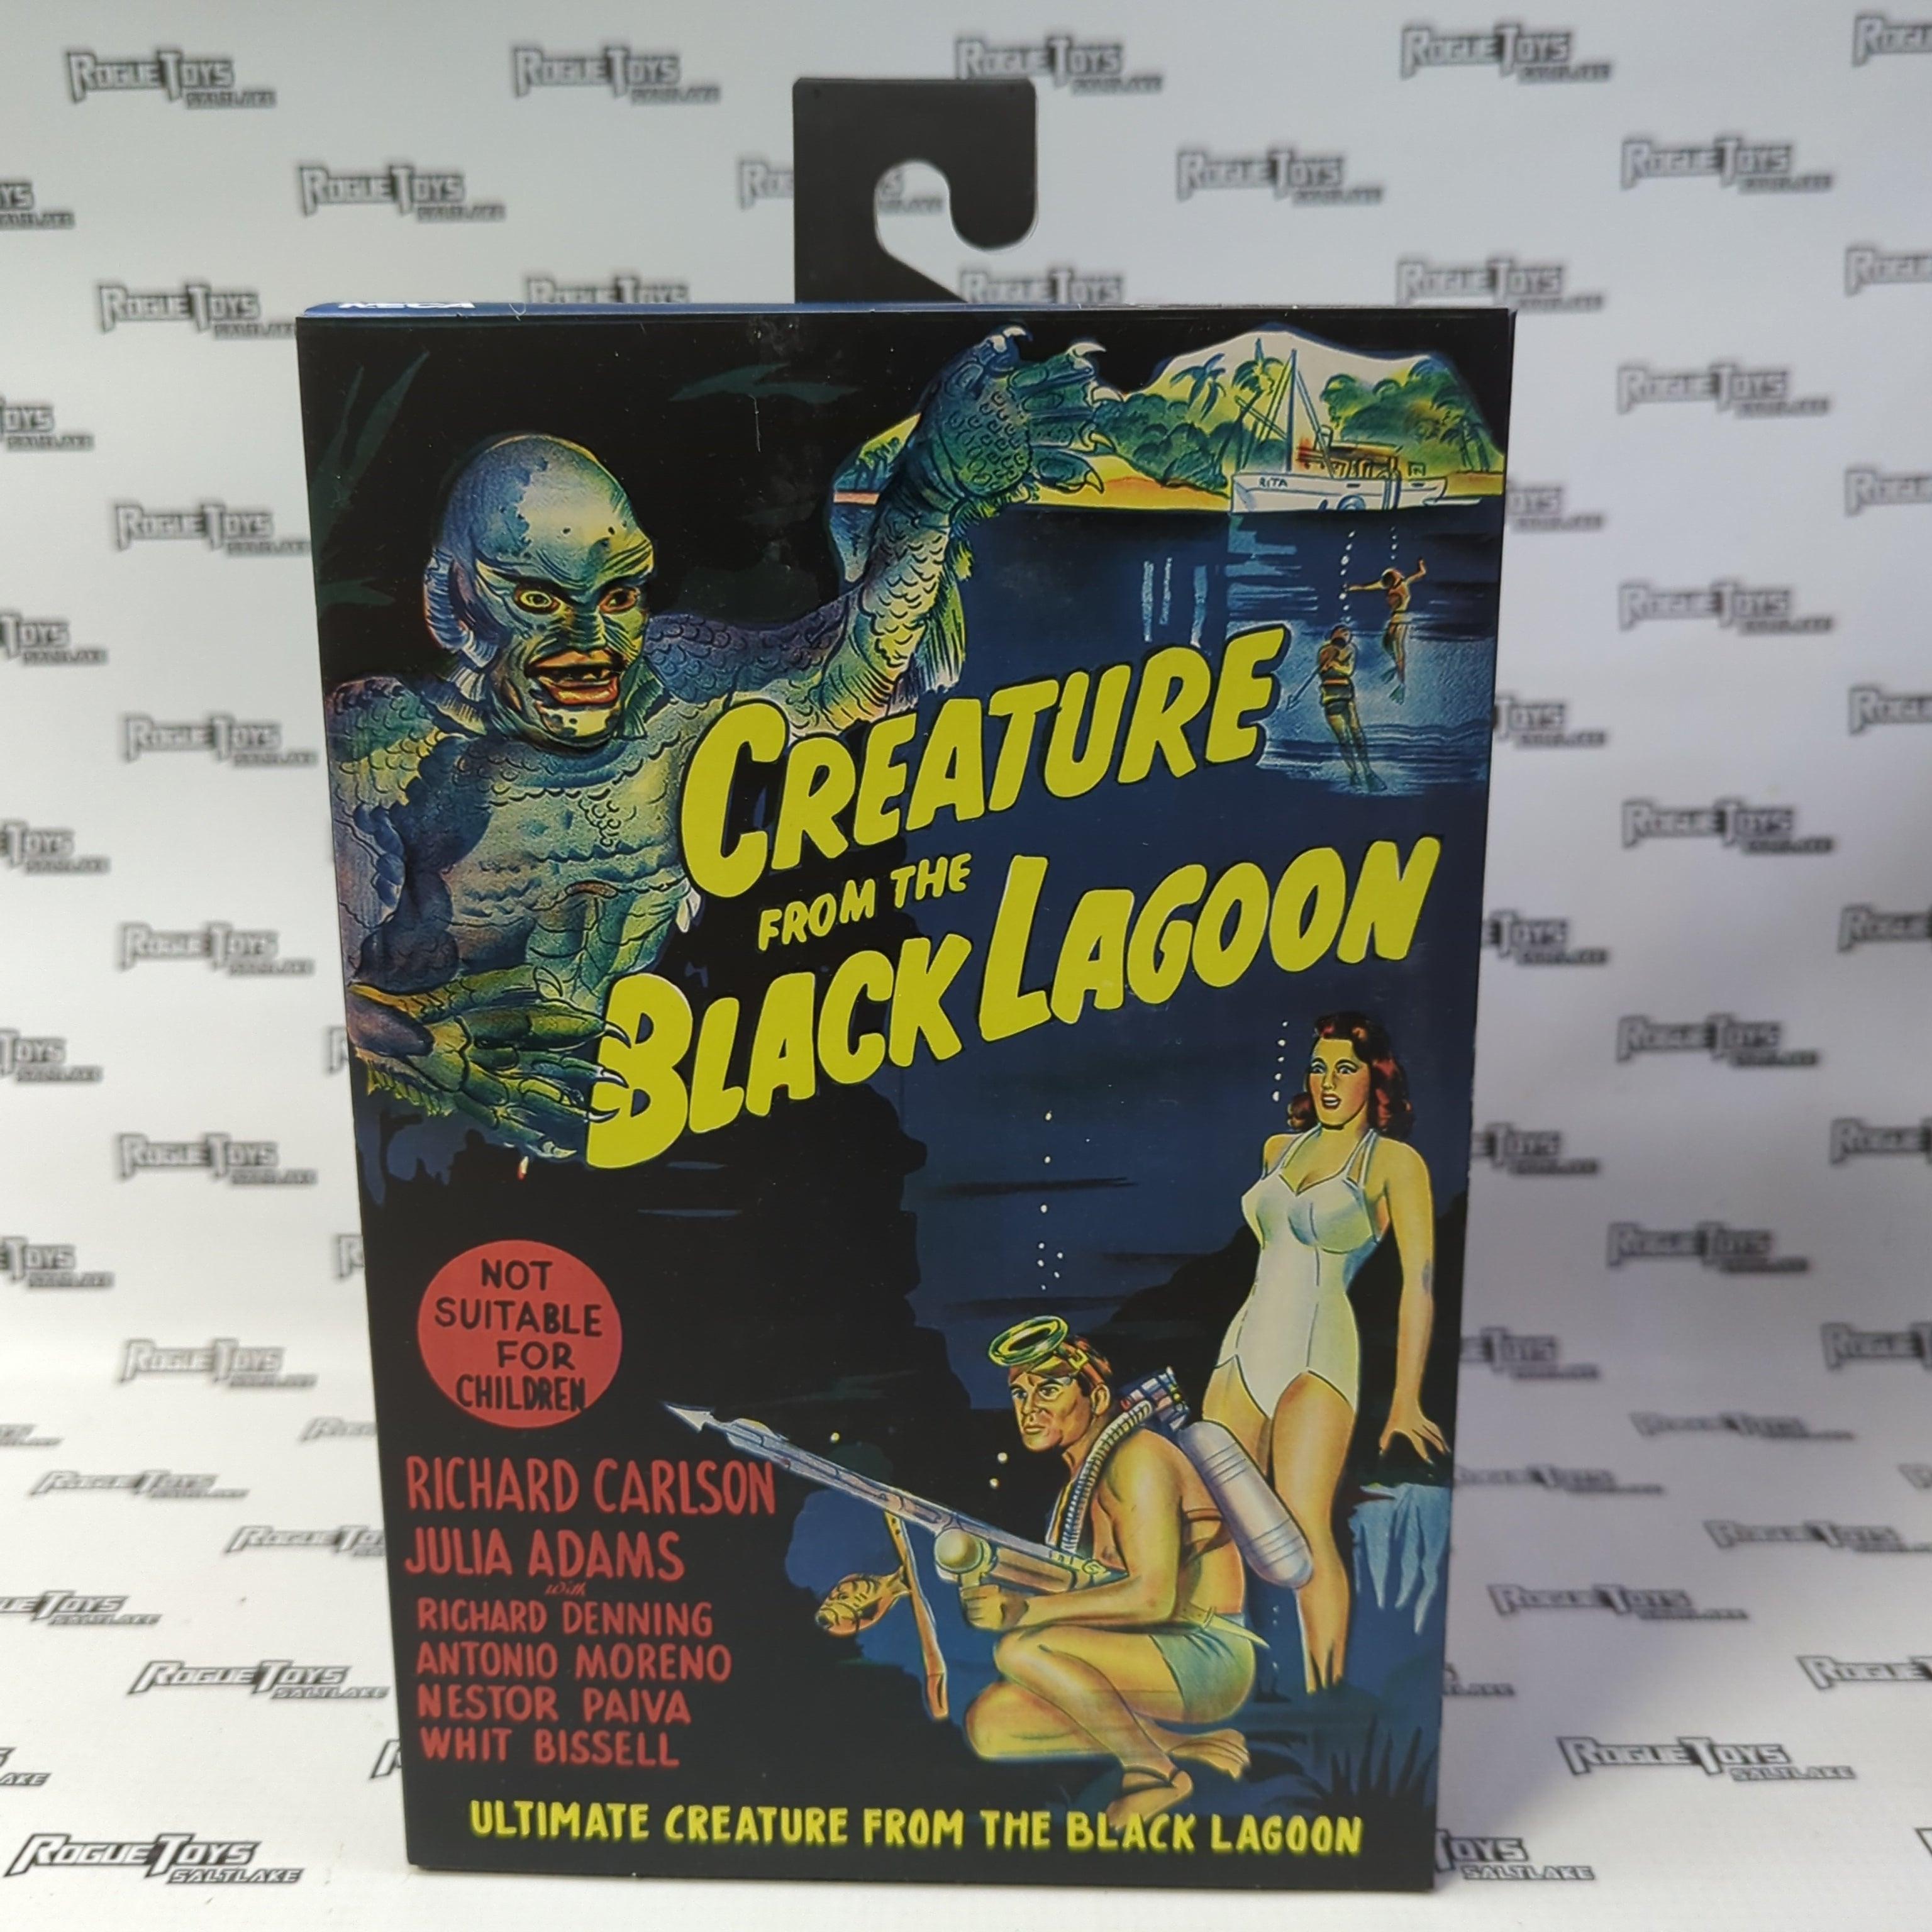 NECA Universal Monsters Ultimate Creature from the Black Lagoon (Black & White Version)